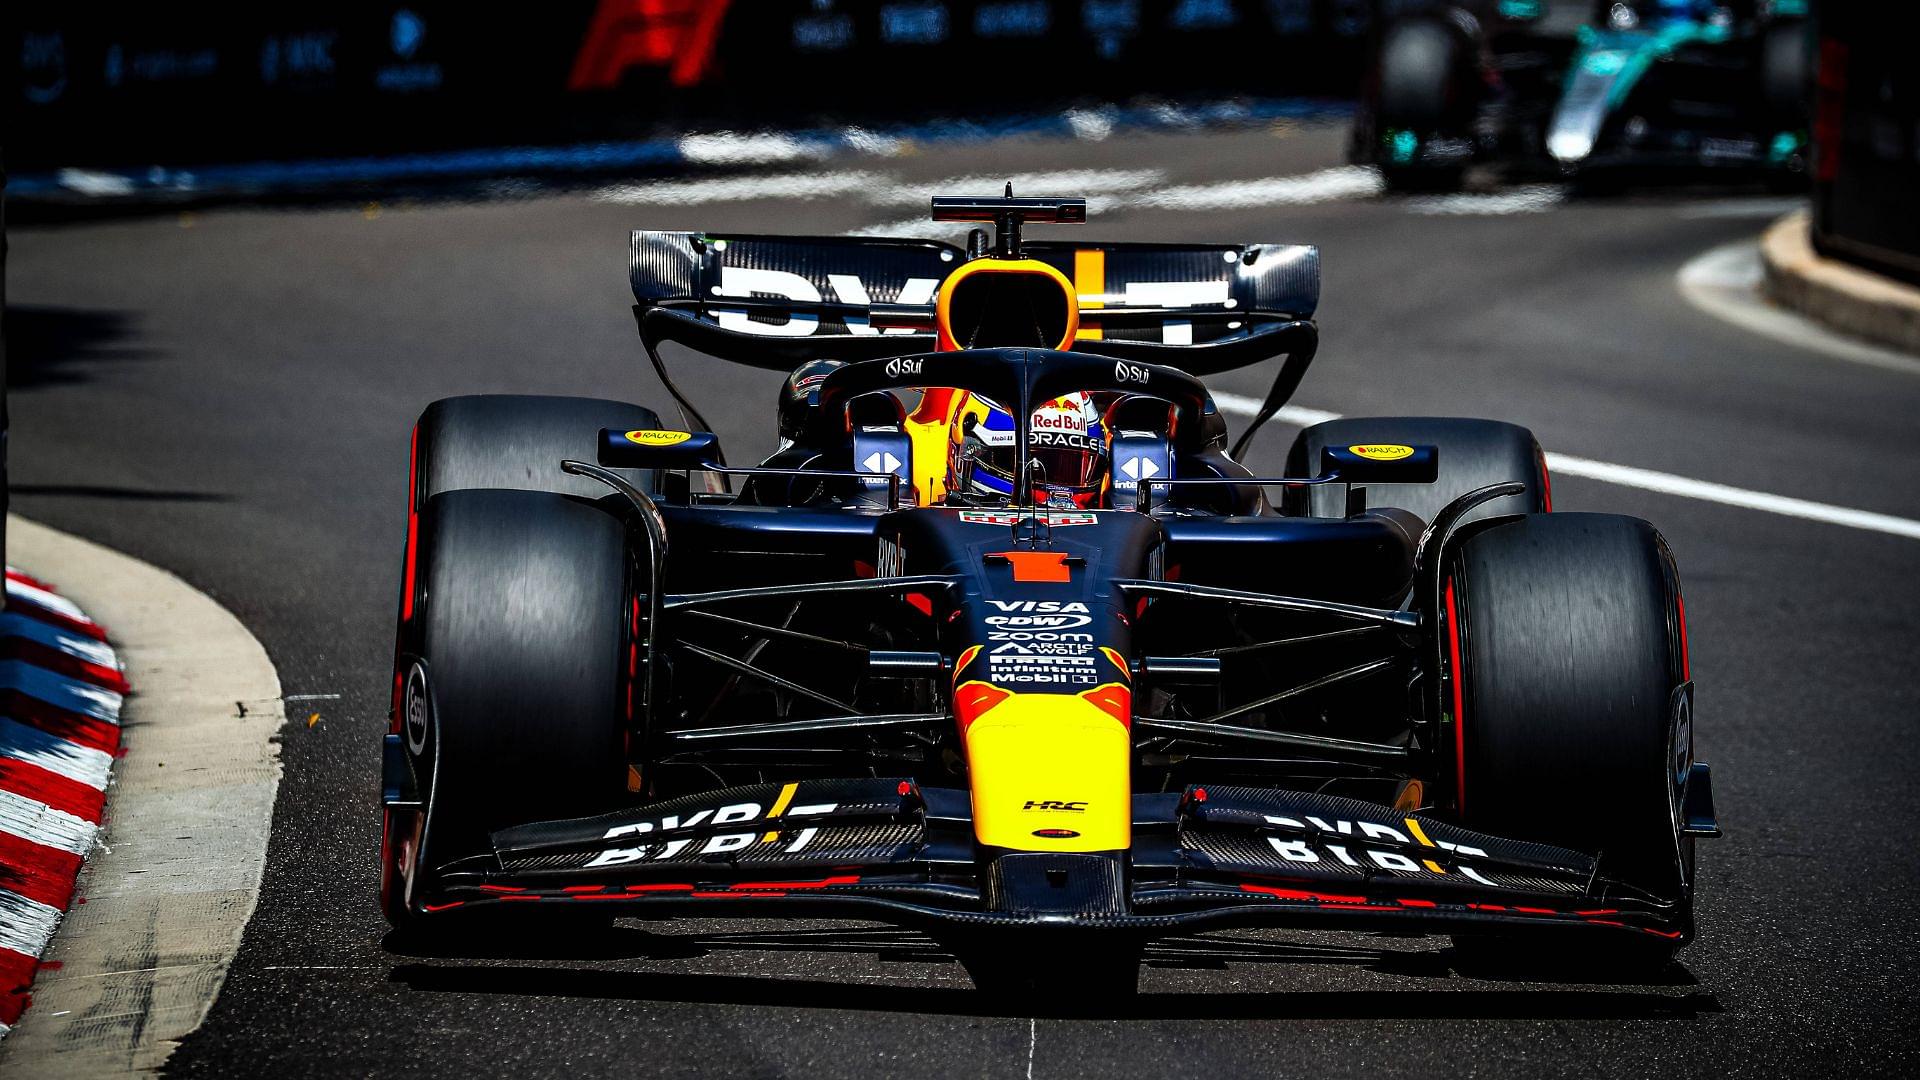 How Red Bull Fumbled Their Monaco GP Setup and Exposed Their Biggest Disadvantage Against Ferrari and McLaren